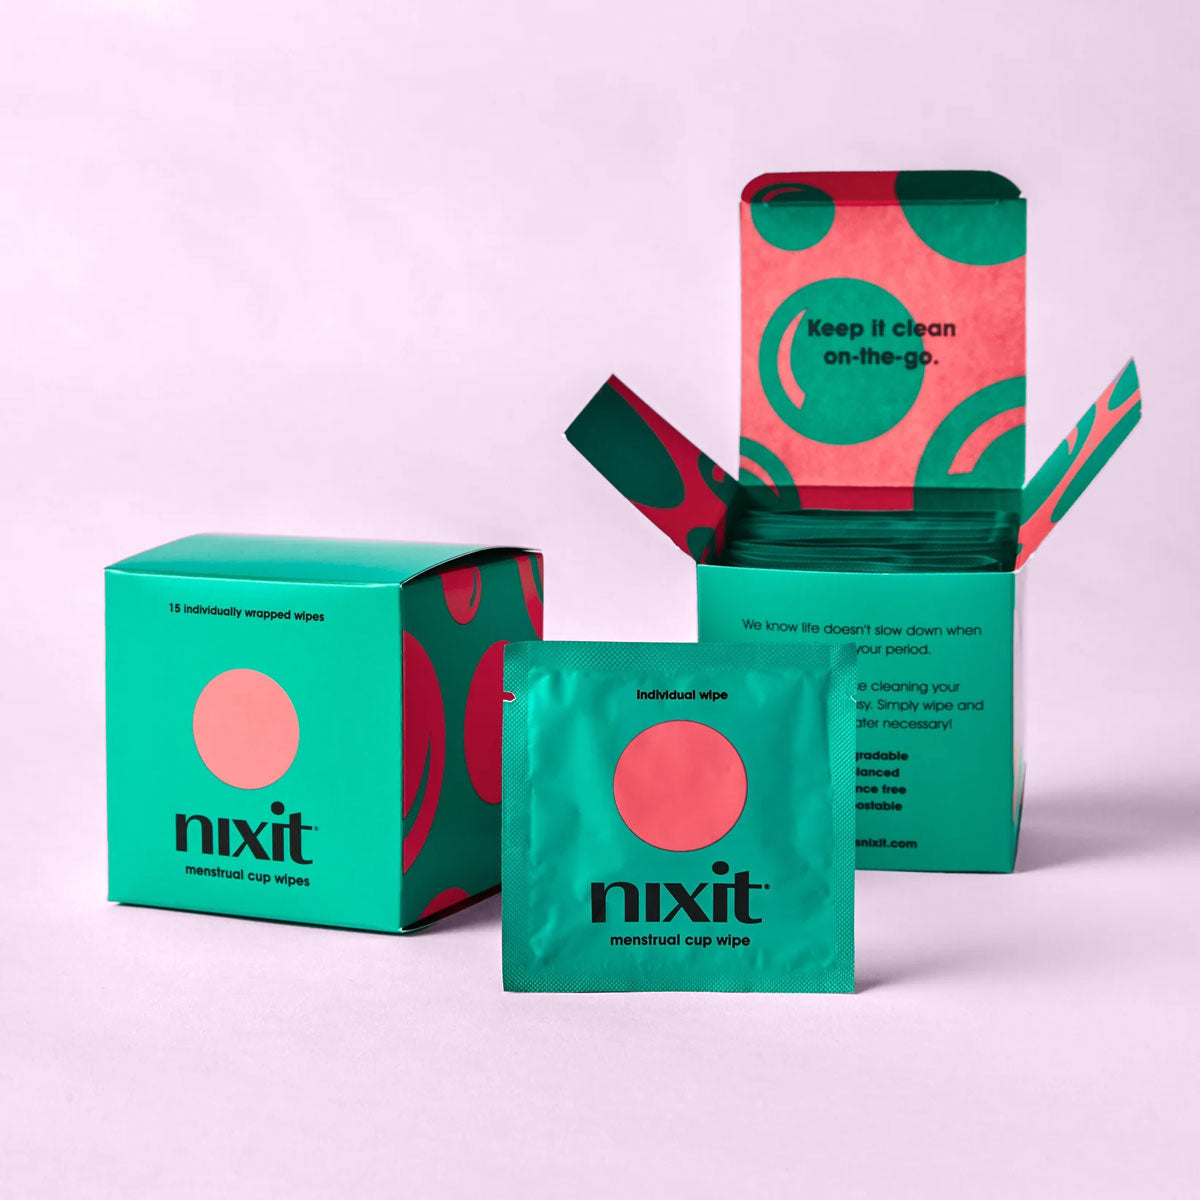 Nixit menstrual cup travel wipes box and individual wipe on purple background